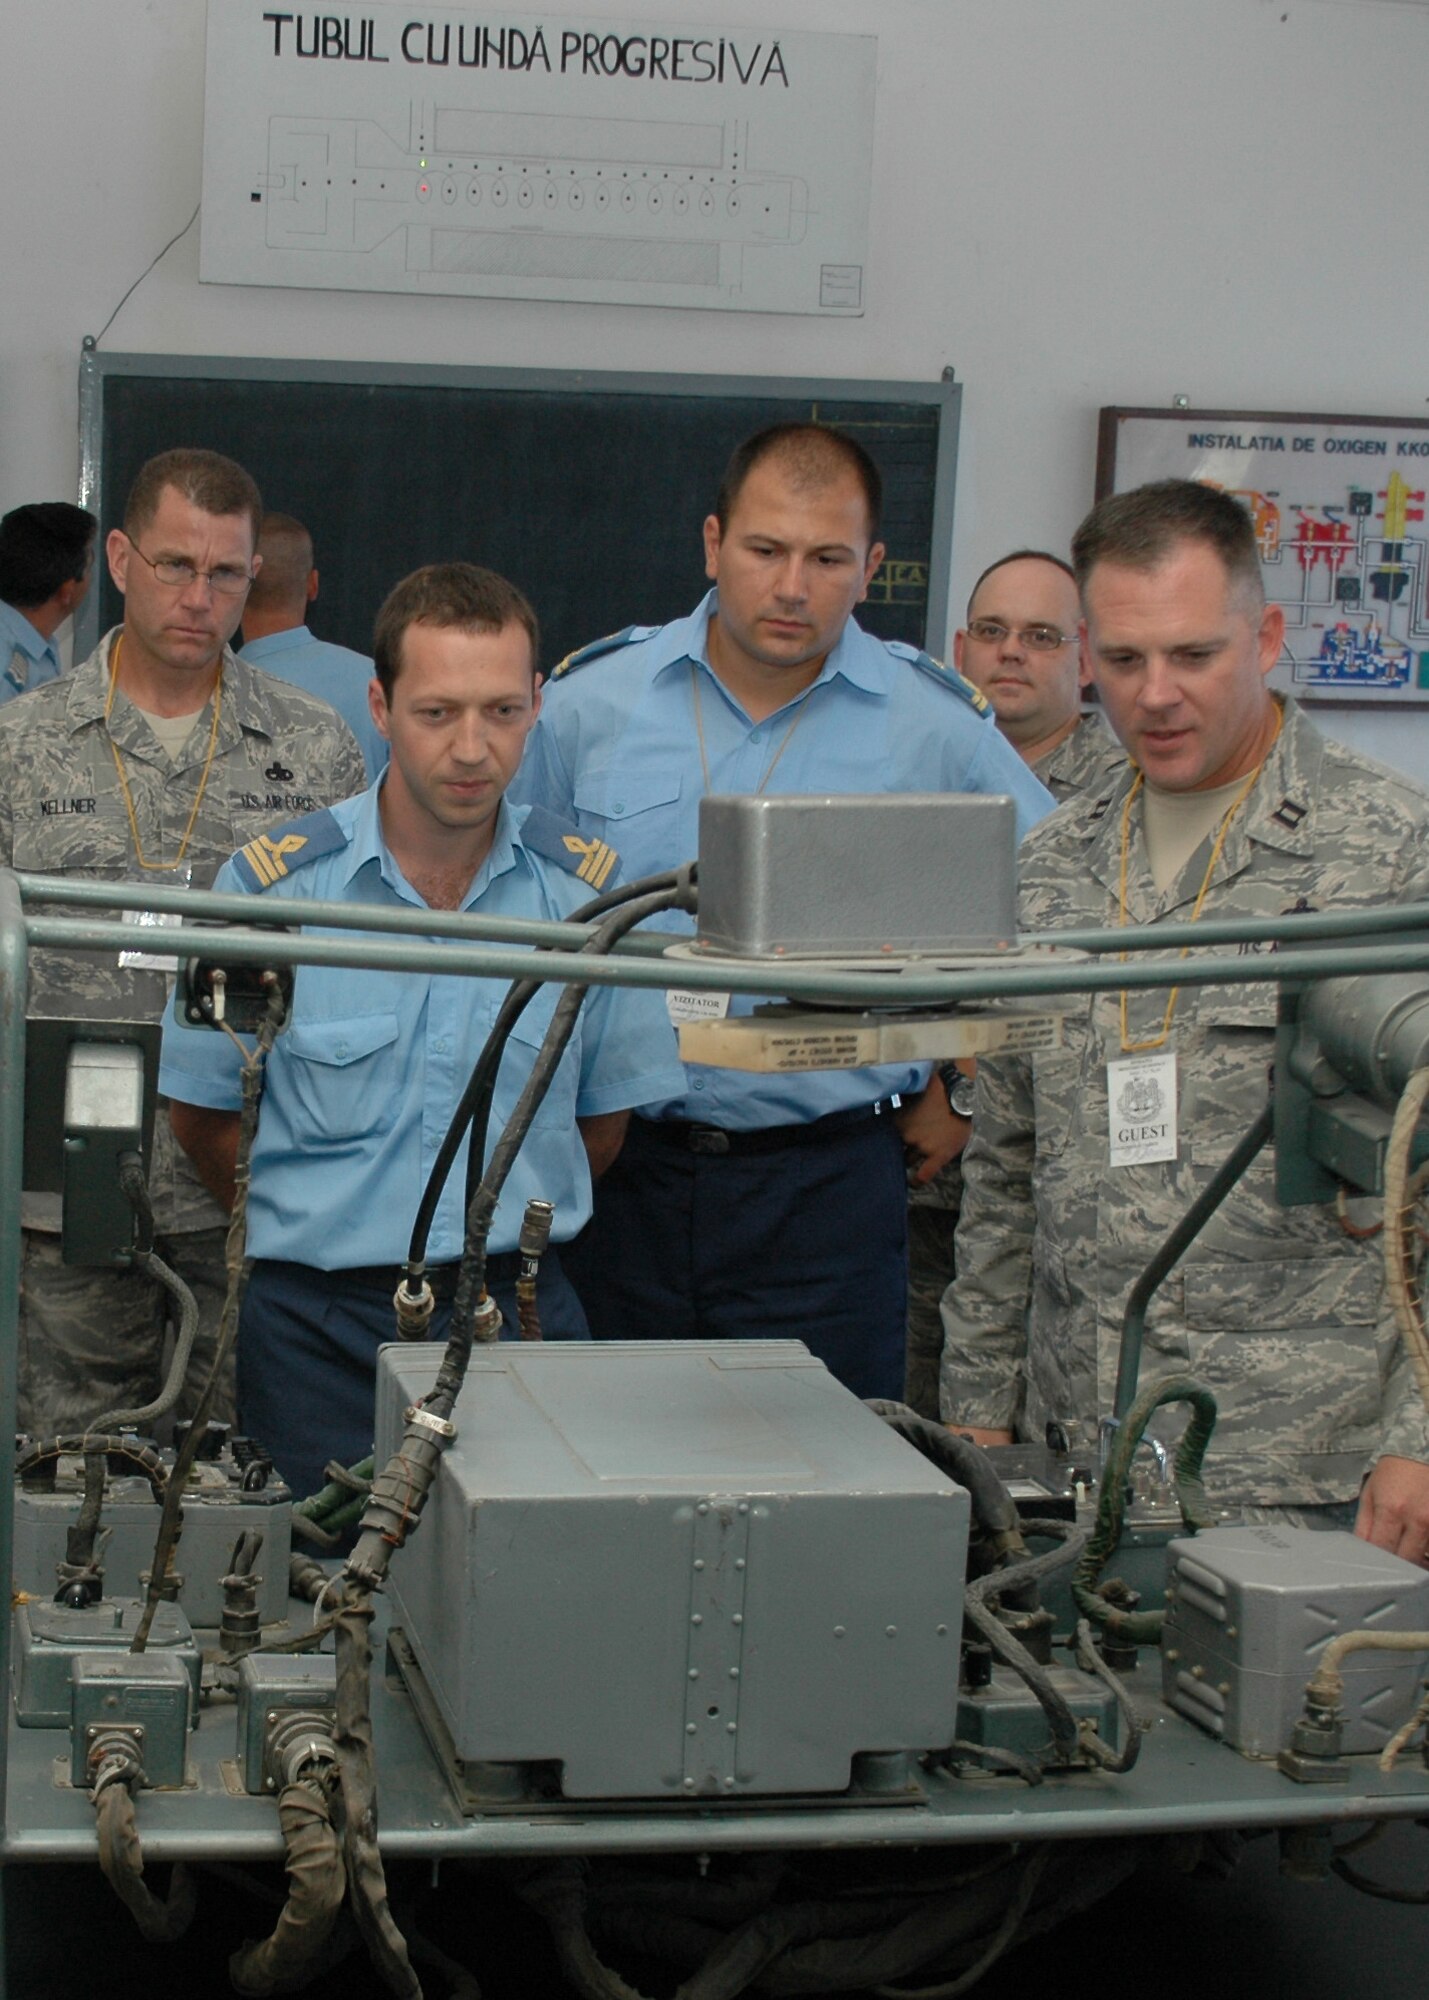 U.S. and Romanian Air Force members tour through the Traian Vuia Air Force Warrant Officer and NCO Military School in Boboc, Romania, Aug. 25, 2009.  The tour was part of a three-person U.S. Air Forces in Europe Maintenance NCO Training Program Traveling Contact Team visit with RoAF aircraft maintainers and WO and NCO school instructors Aug. 25-28. (U.S. Air Force photo/Tech. Sgt. Michael O’Connor)